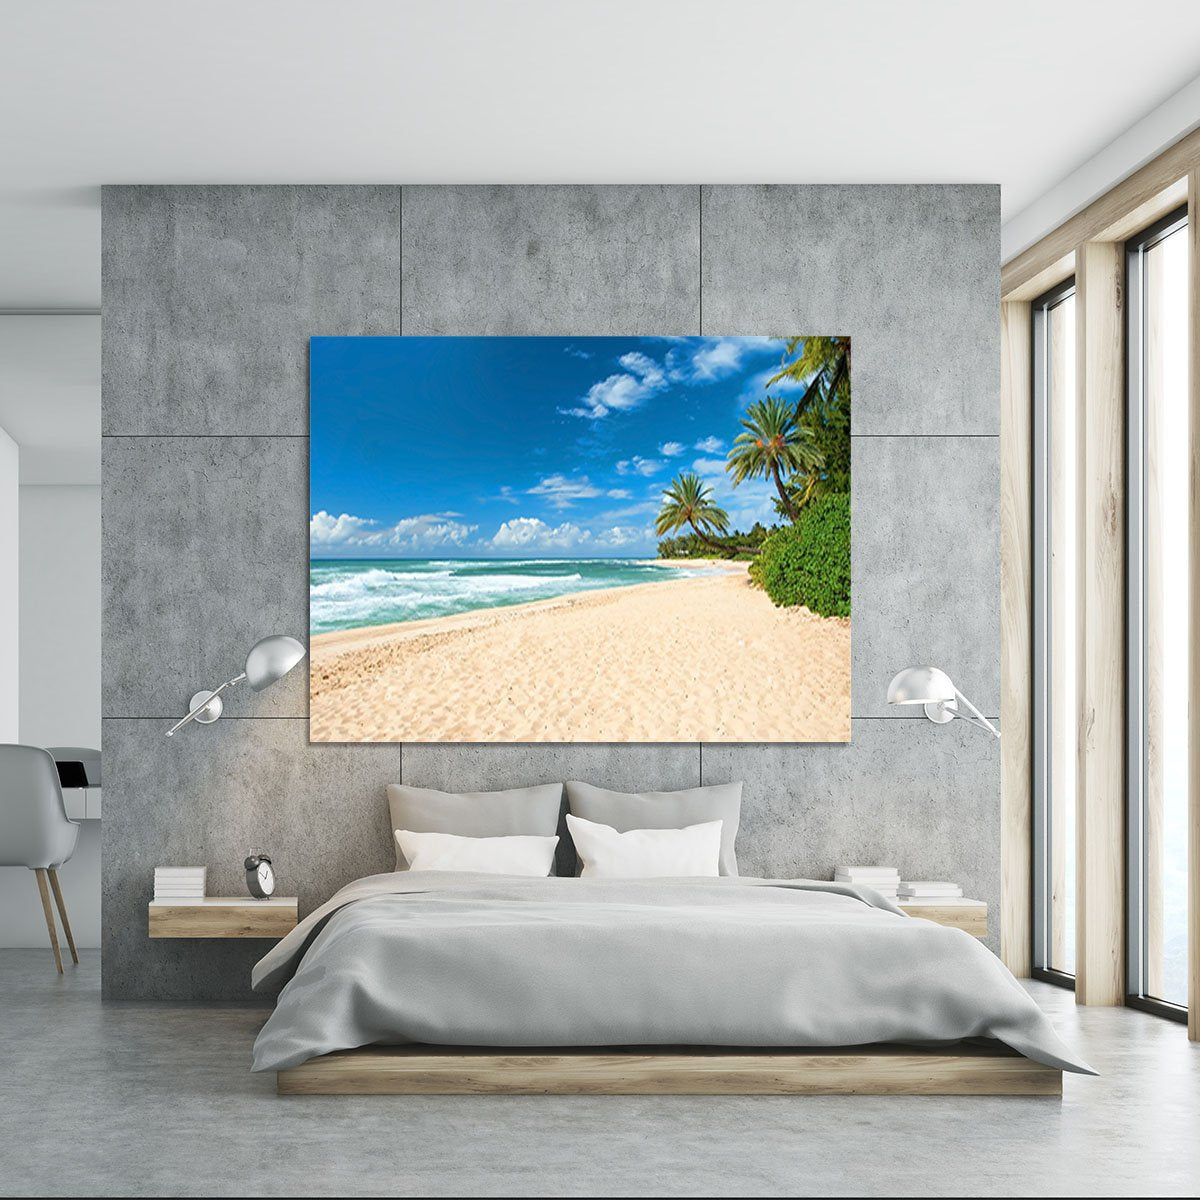 Untouched sandy beach with palms trees Canvas Print or Poster